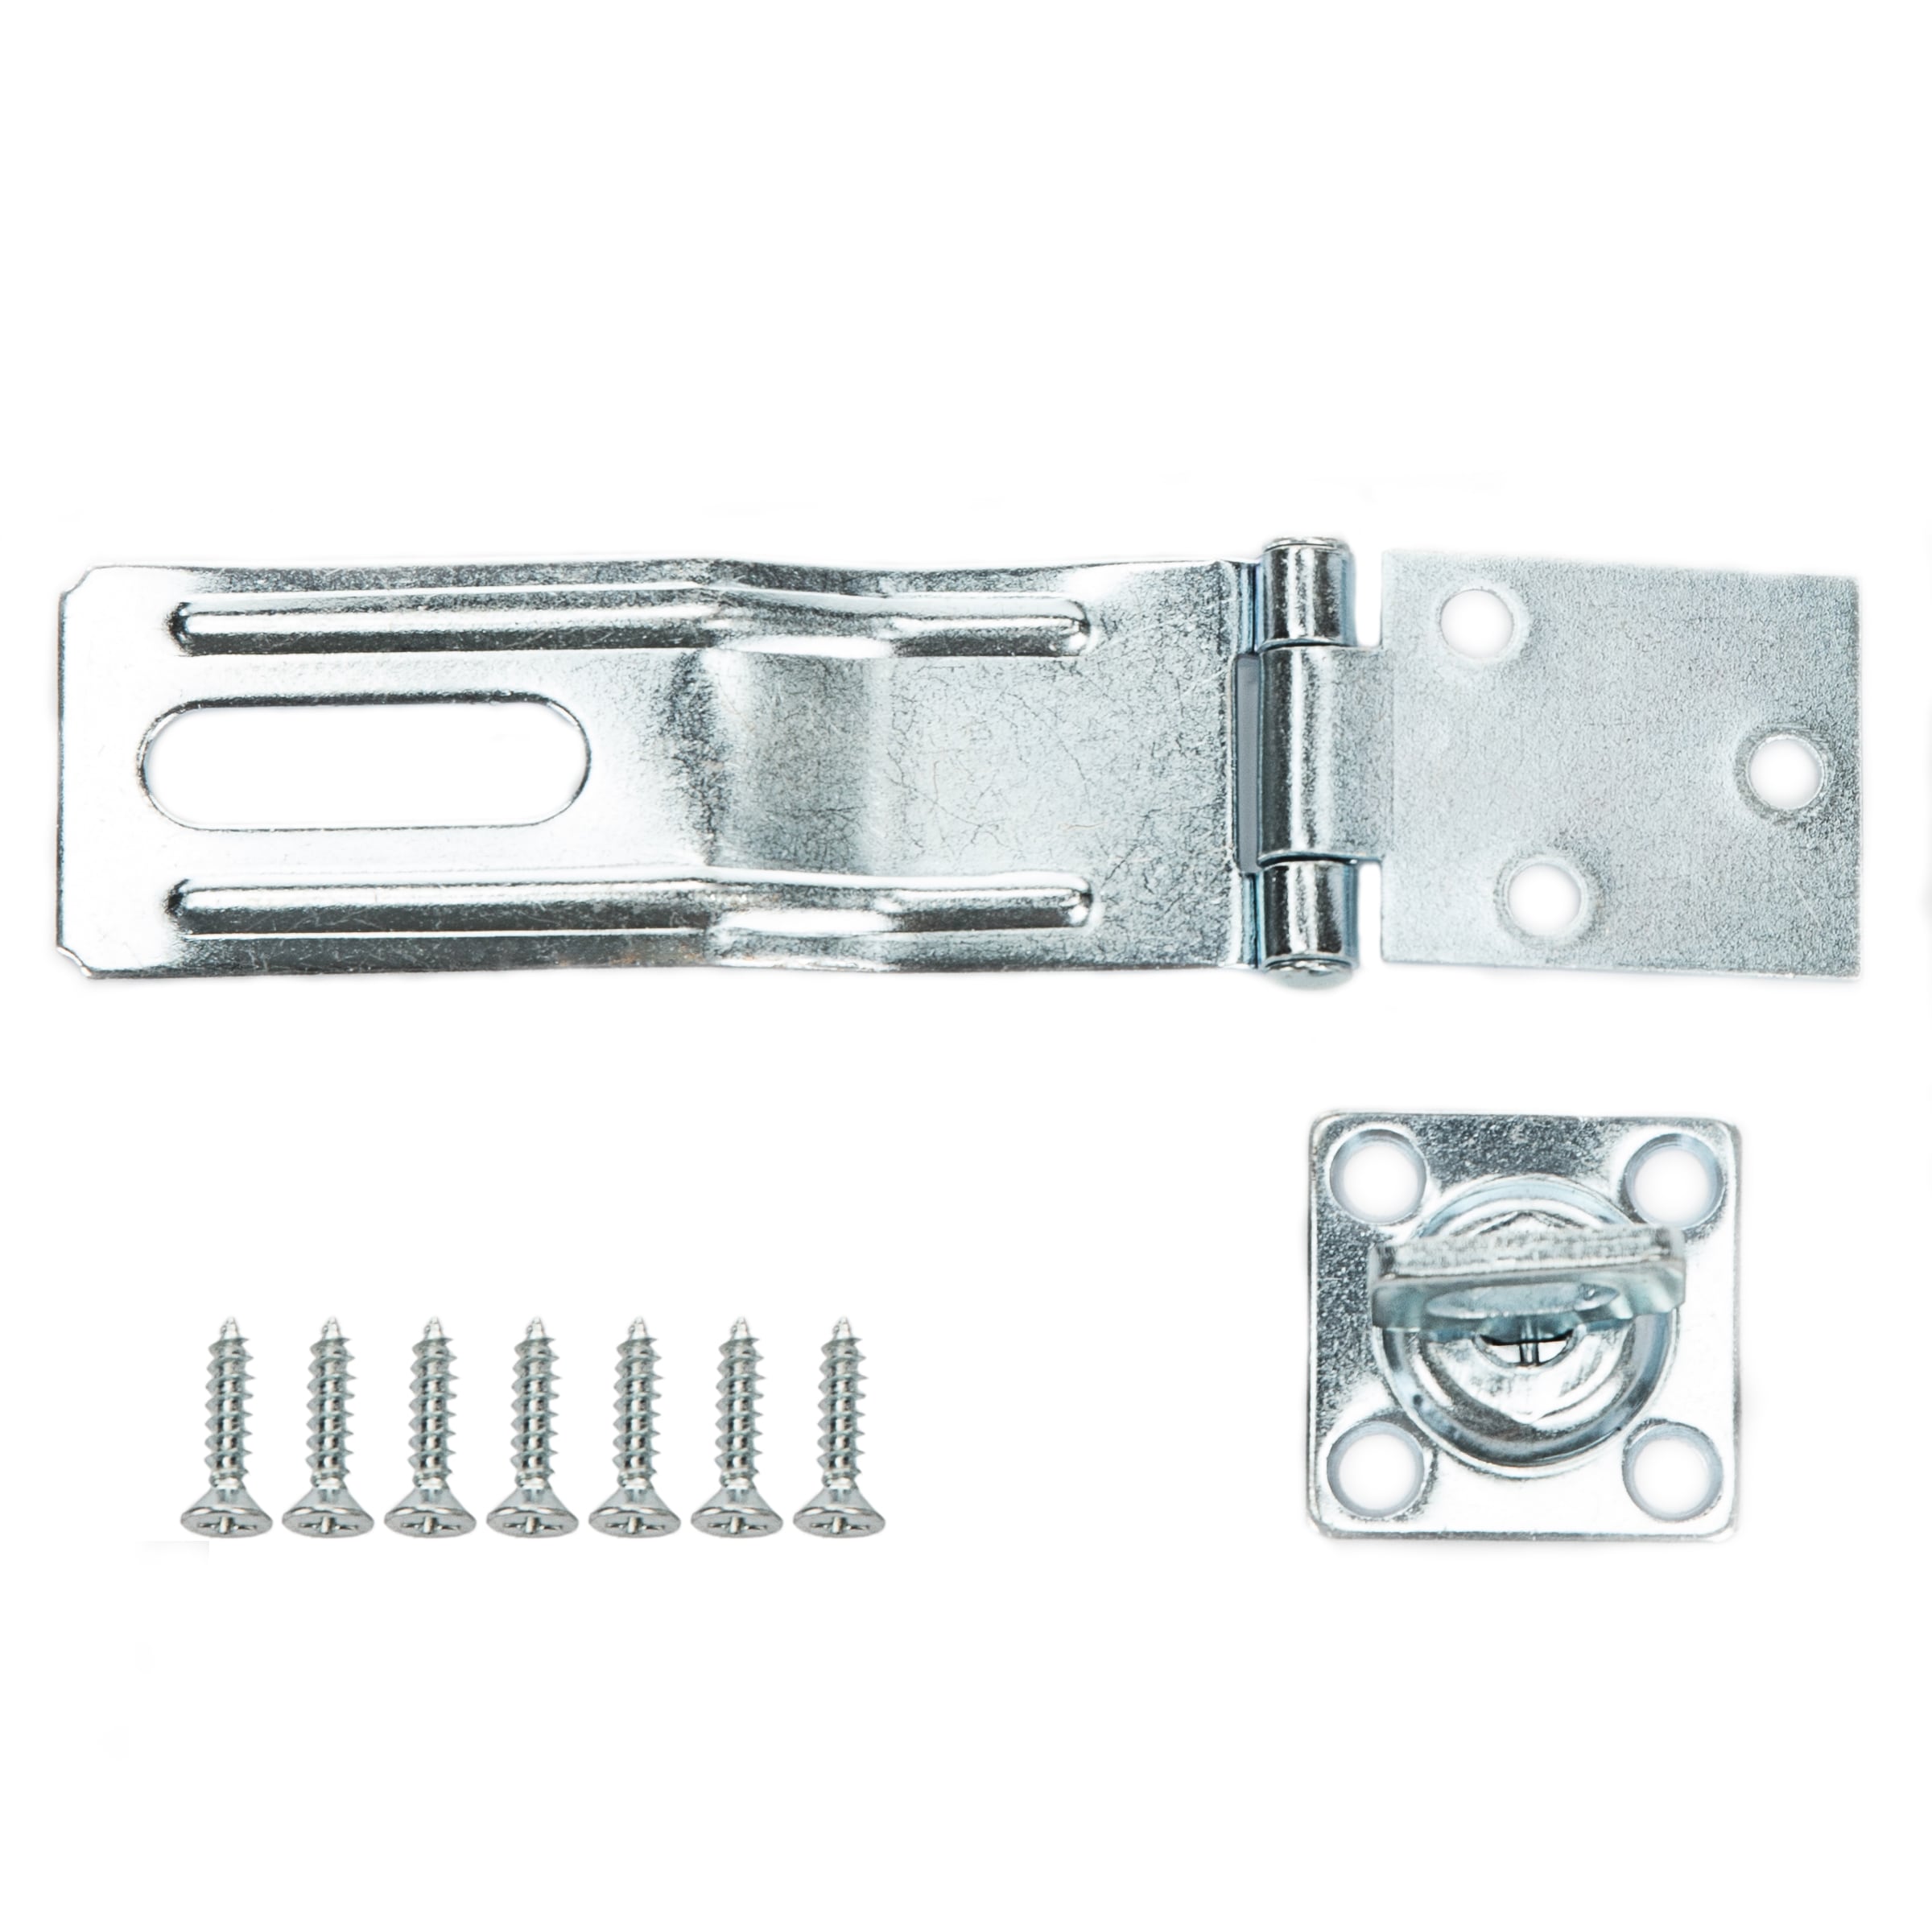 lowes hasp